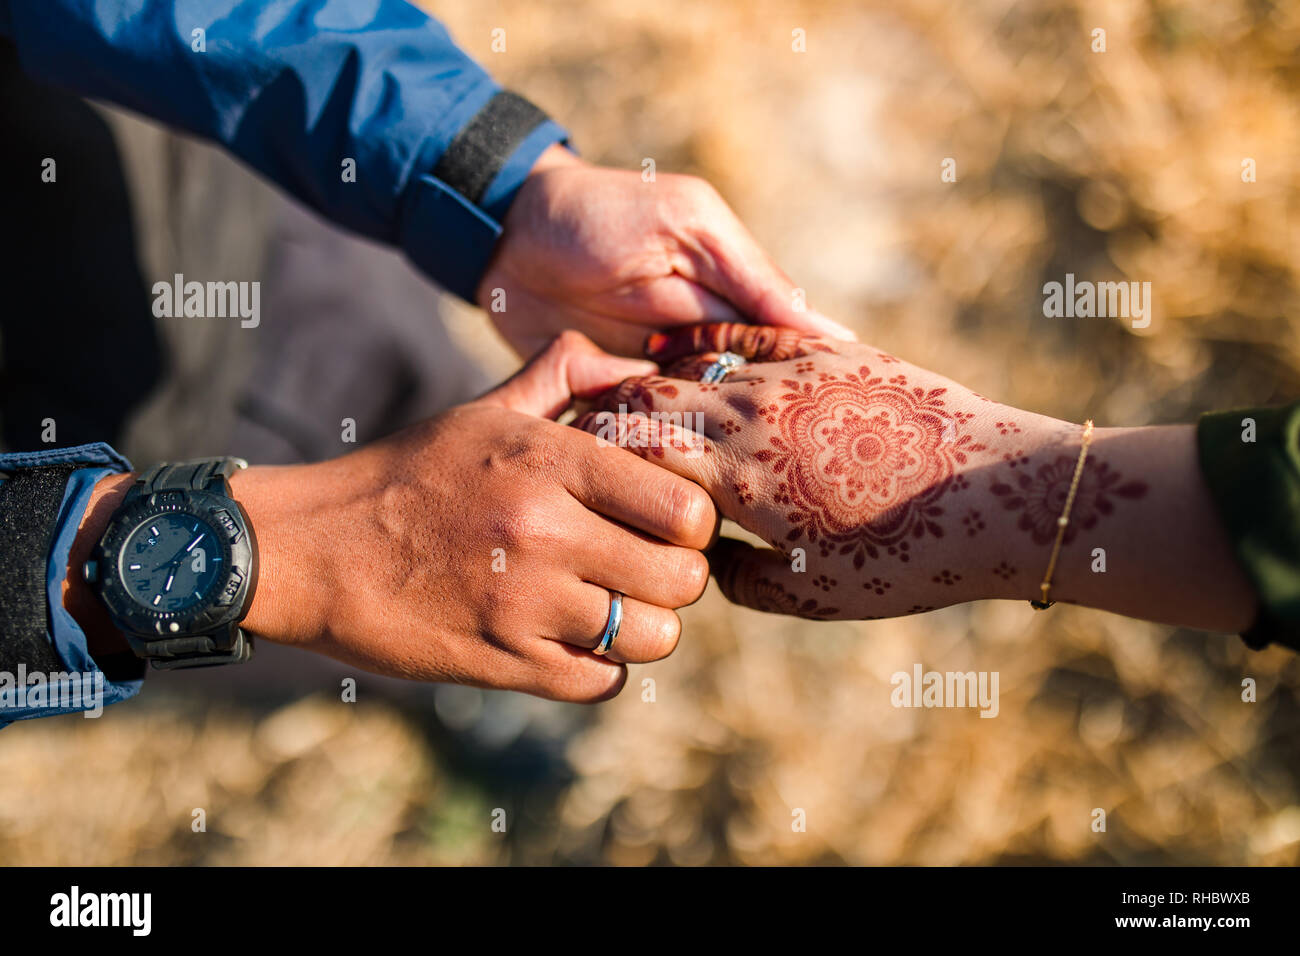 Young And Happy Couple Holding Hands Man Or Boy And Girl Holding Their Hands The Girl S Hand Has Henna Asian Couple Love Stock Photo Alamy